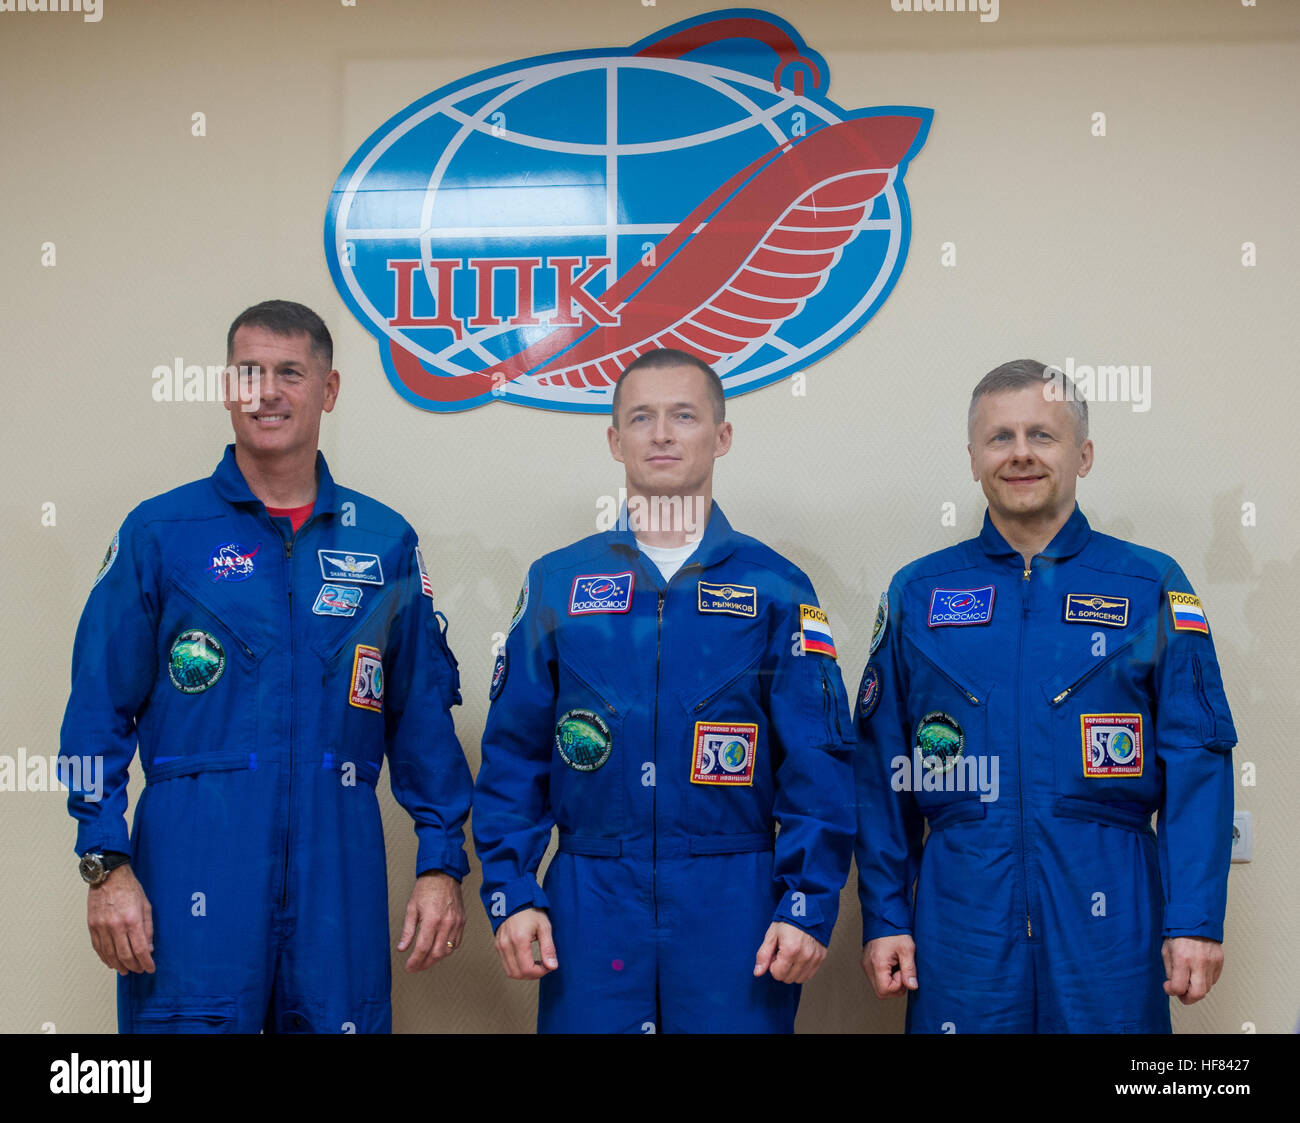 Expedition 49 flight engineer Shane Kimbrough of NASA, left, Soyuz commander Sergey Ryzhikov of Roscosmos, center, and flight engineer Andrey Borisenko of Roscosmos, left, pose for a picture at the conclusion of a crew press conference Tuesday, Oct. 18, 2016 at the Cosmonaut Hotel in Baikonur, Kazakhstan.  Kimbrough, Ryzhikov, and Borisenko are scheduled to launch to the International Space Station aboard the Soyuz MS-02 spacecraft from the Baikonur Cosmodrome on Oct. 19. Stock Photo